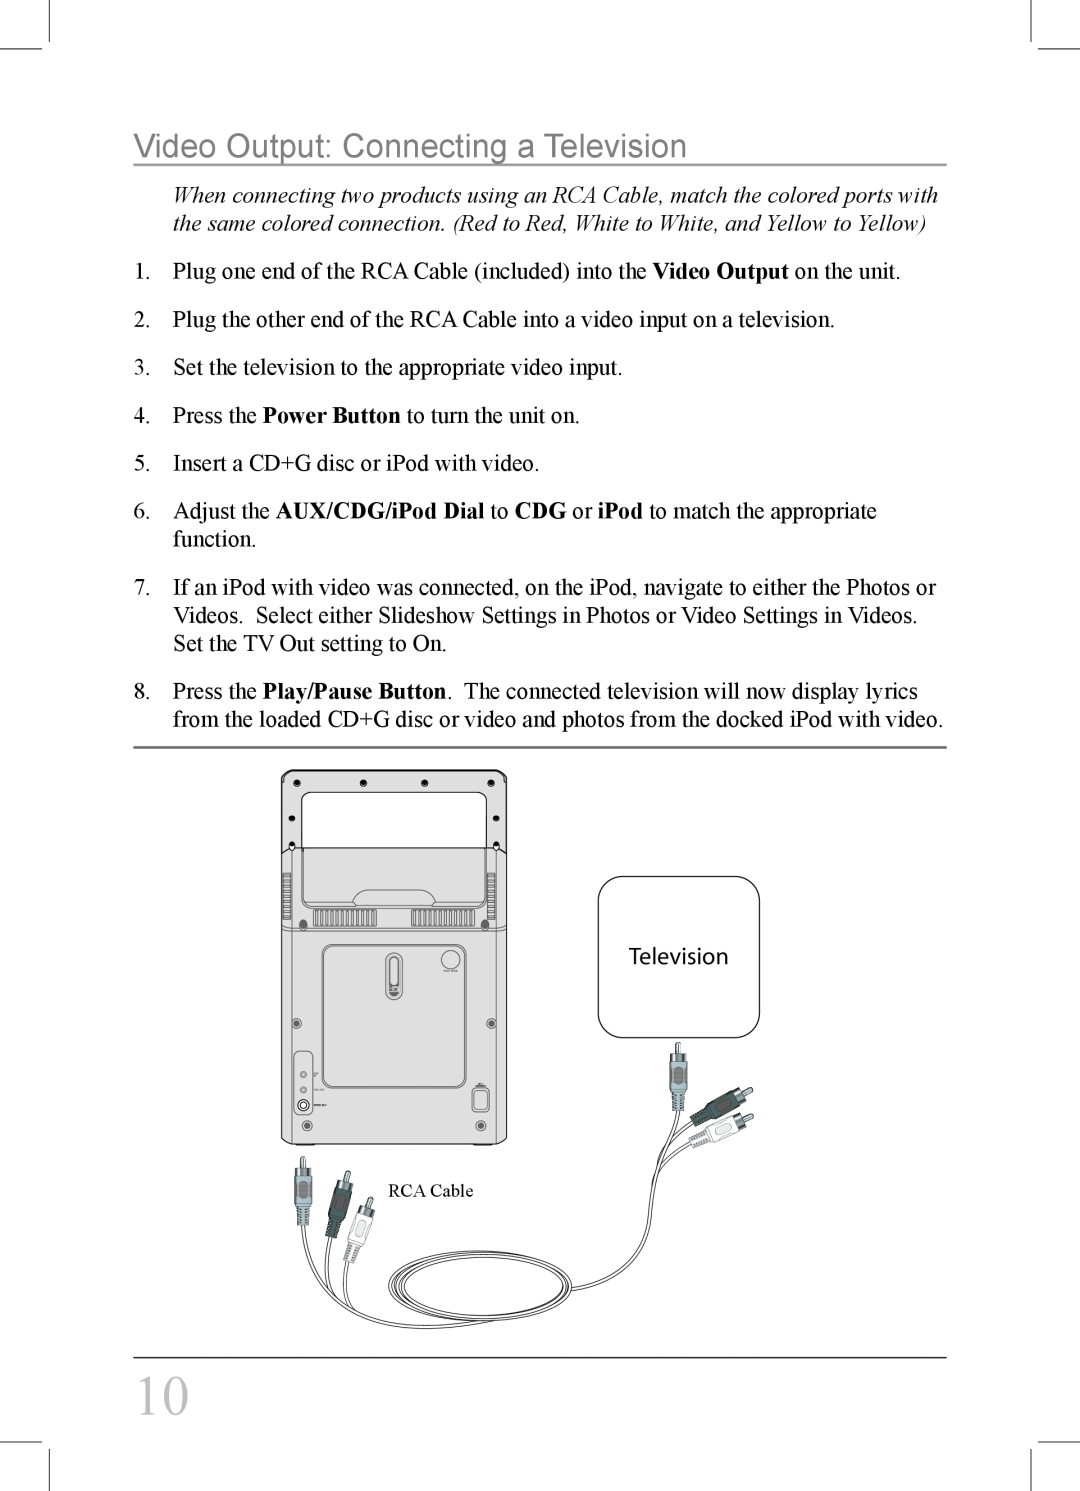 iLive IJ308W instruction manual Video Output Connecting a Television 